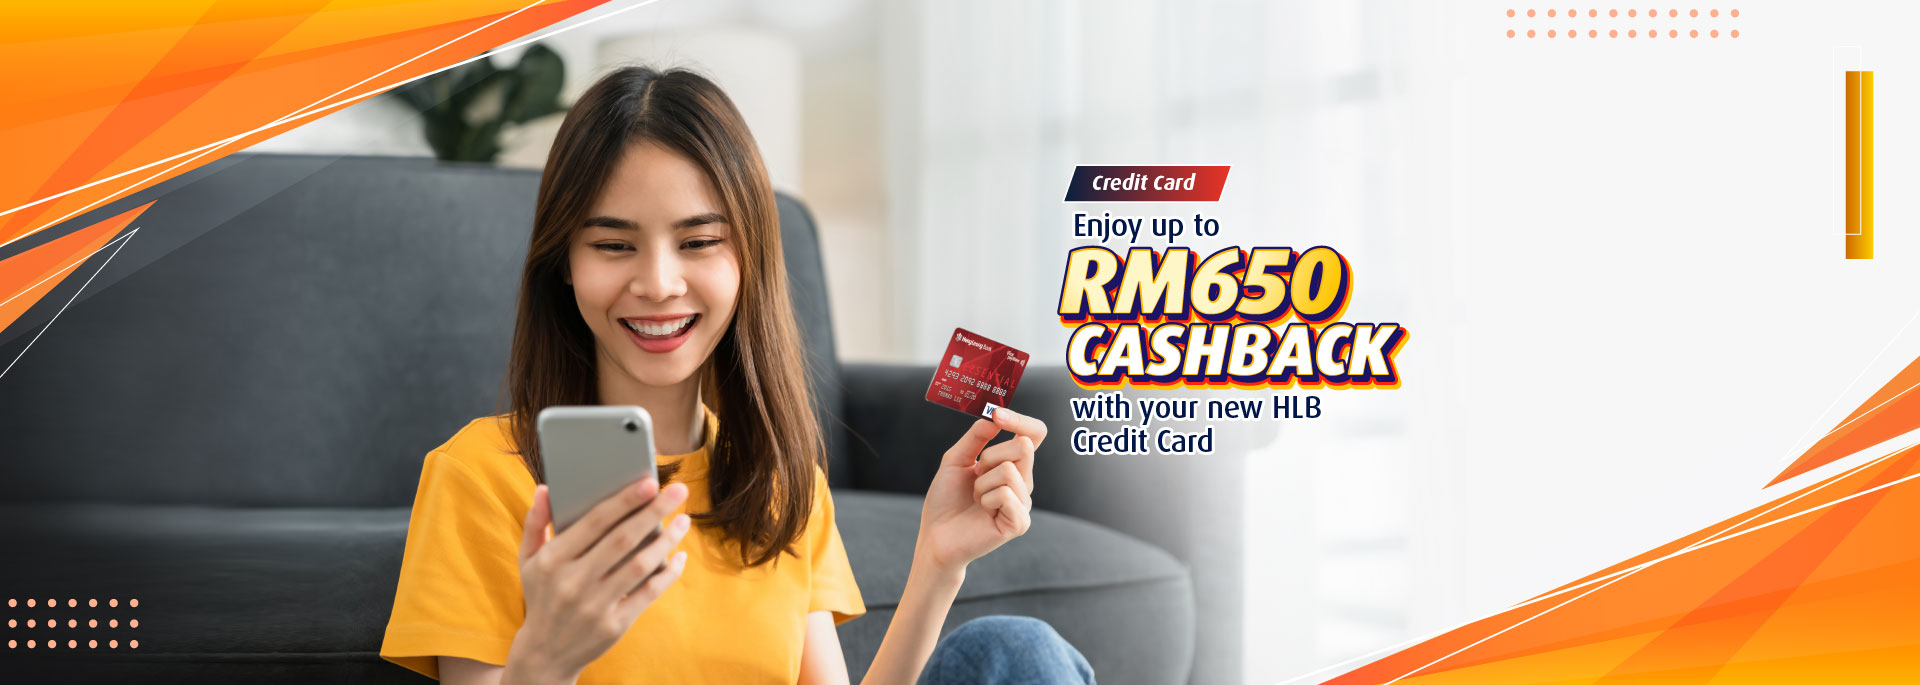 Getting up to RM650 Cashback with your new HLB Credit Card is as simple as ABC